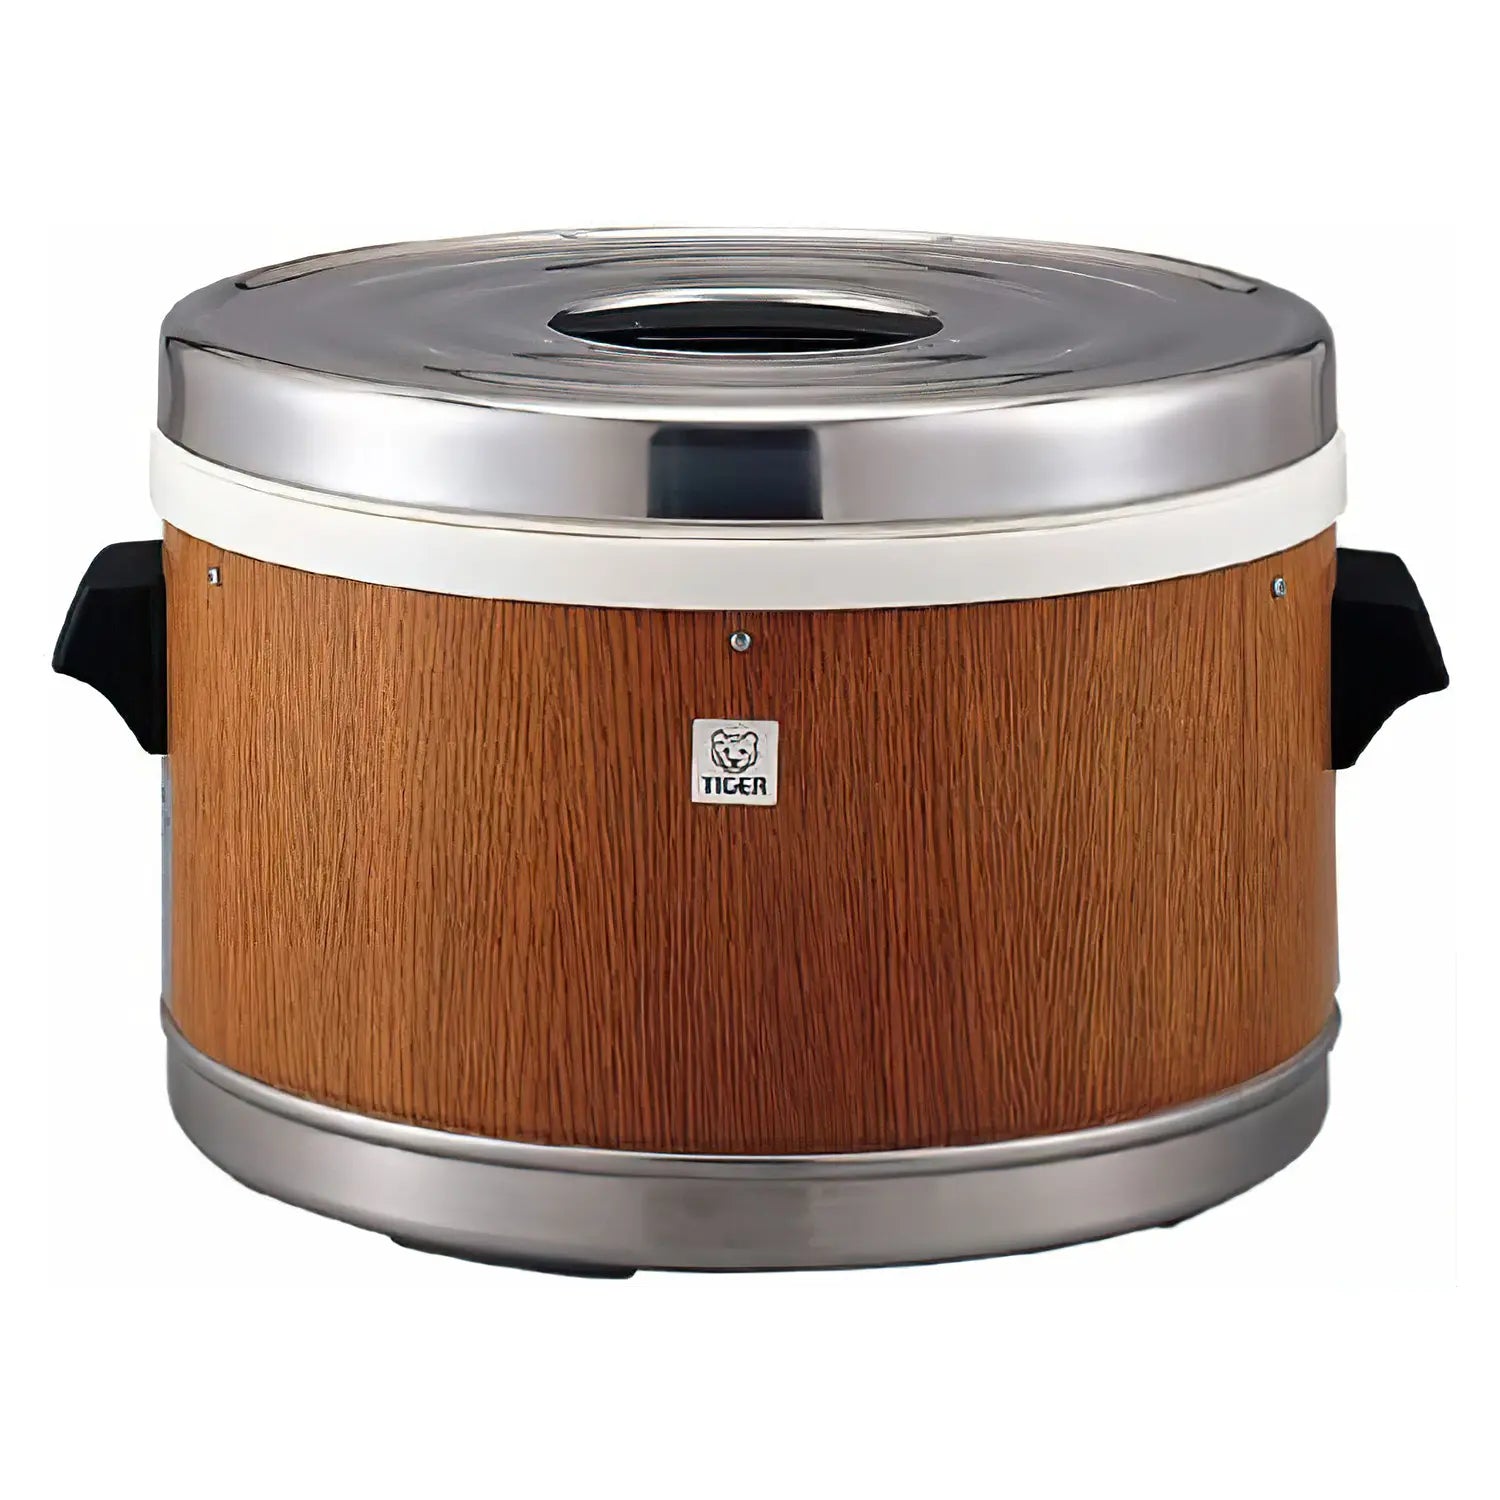 Stainless Steel Inner Pot Full Body Cylinder Electric Rice Cooker